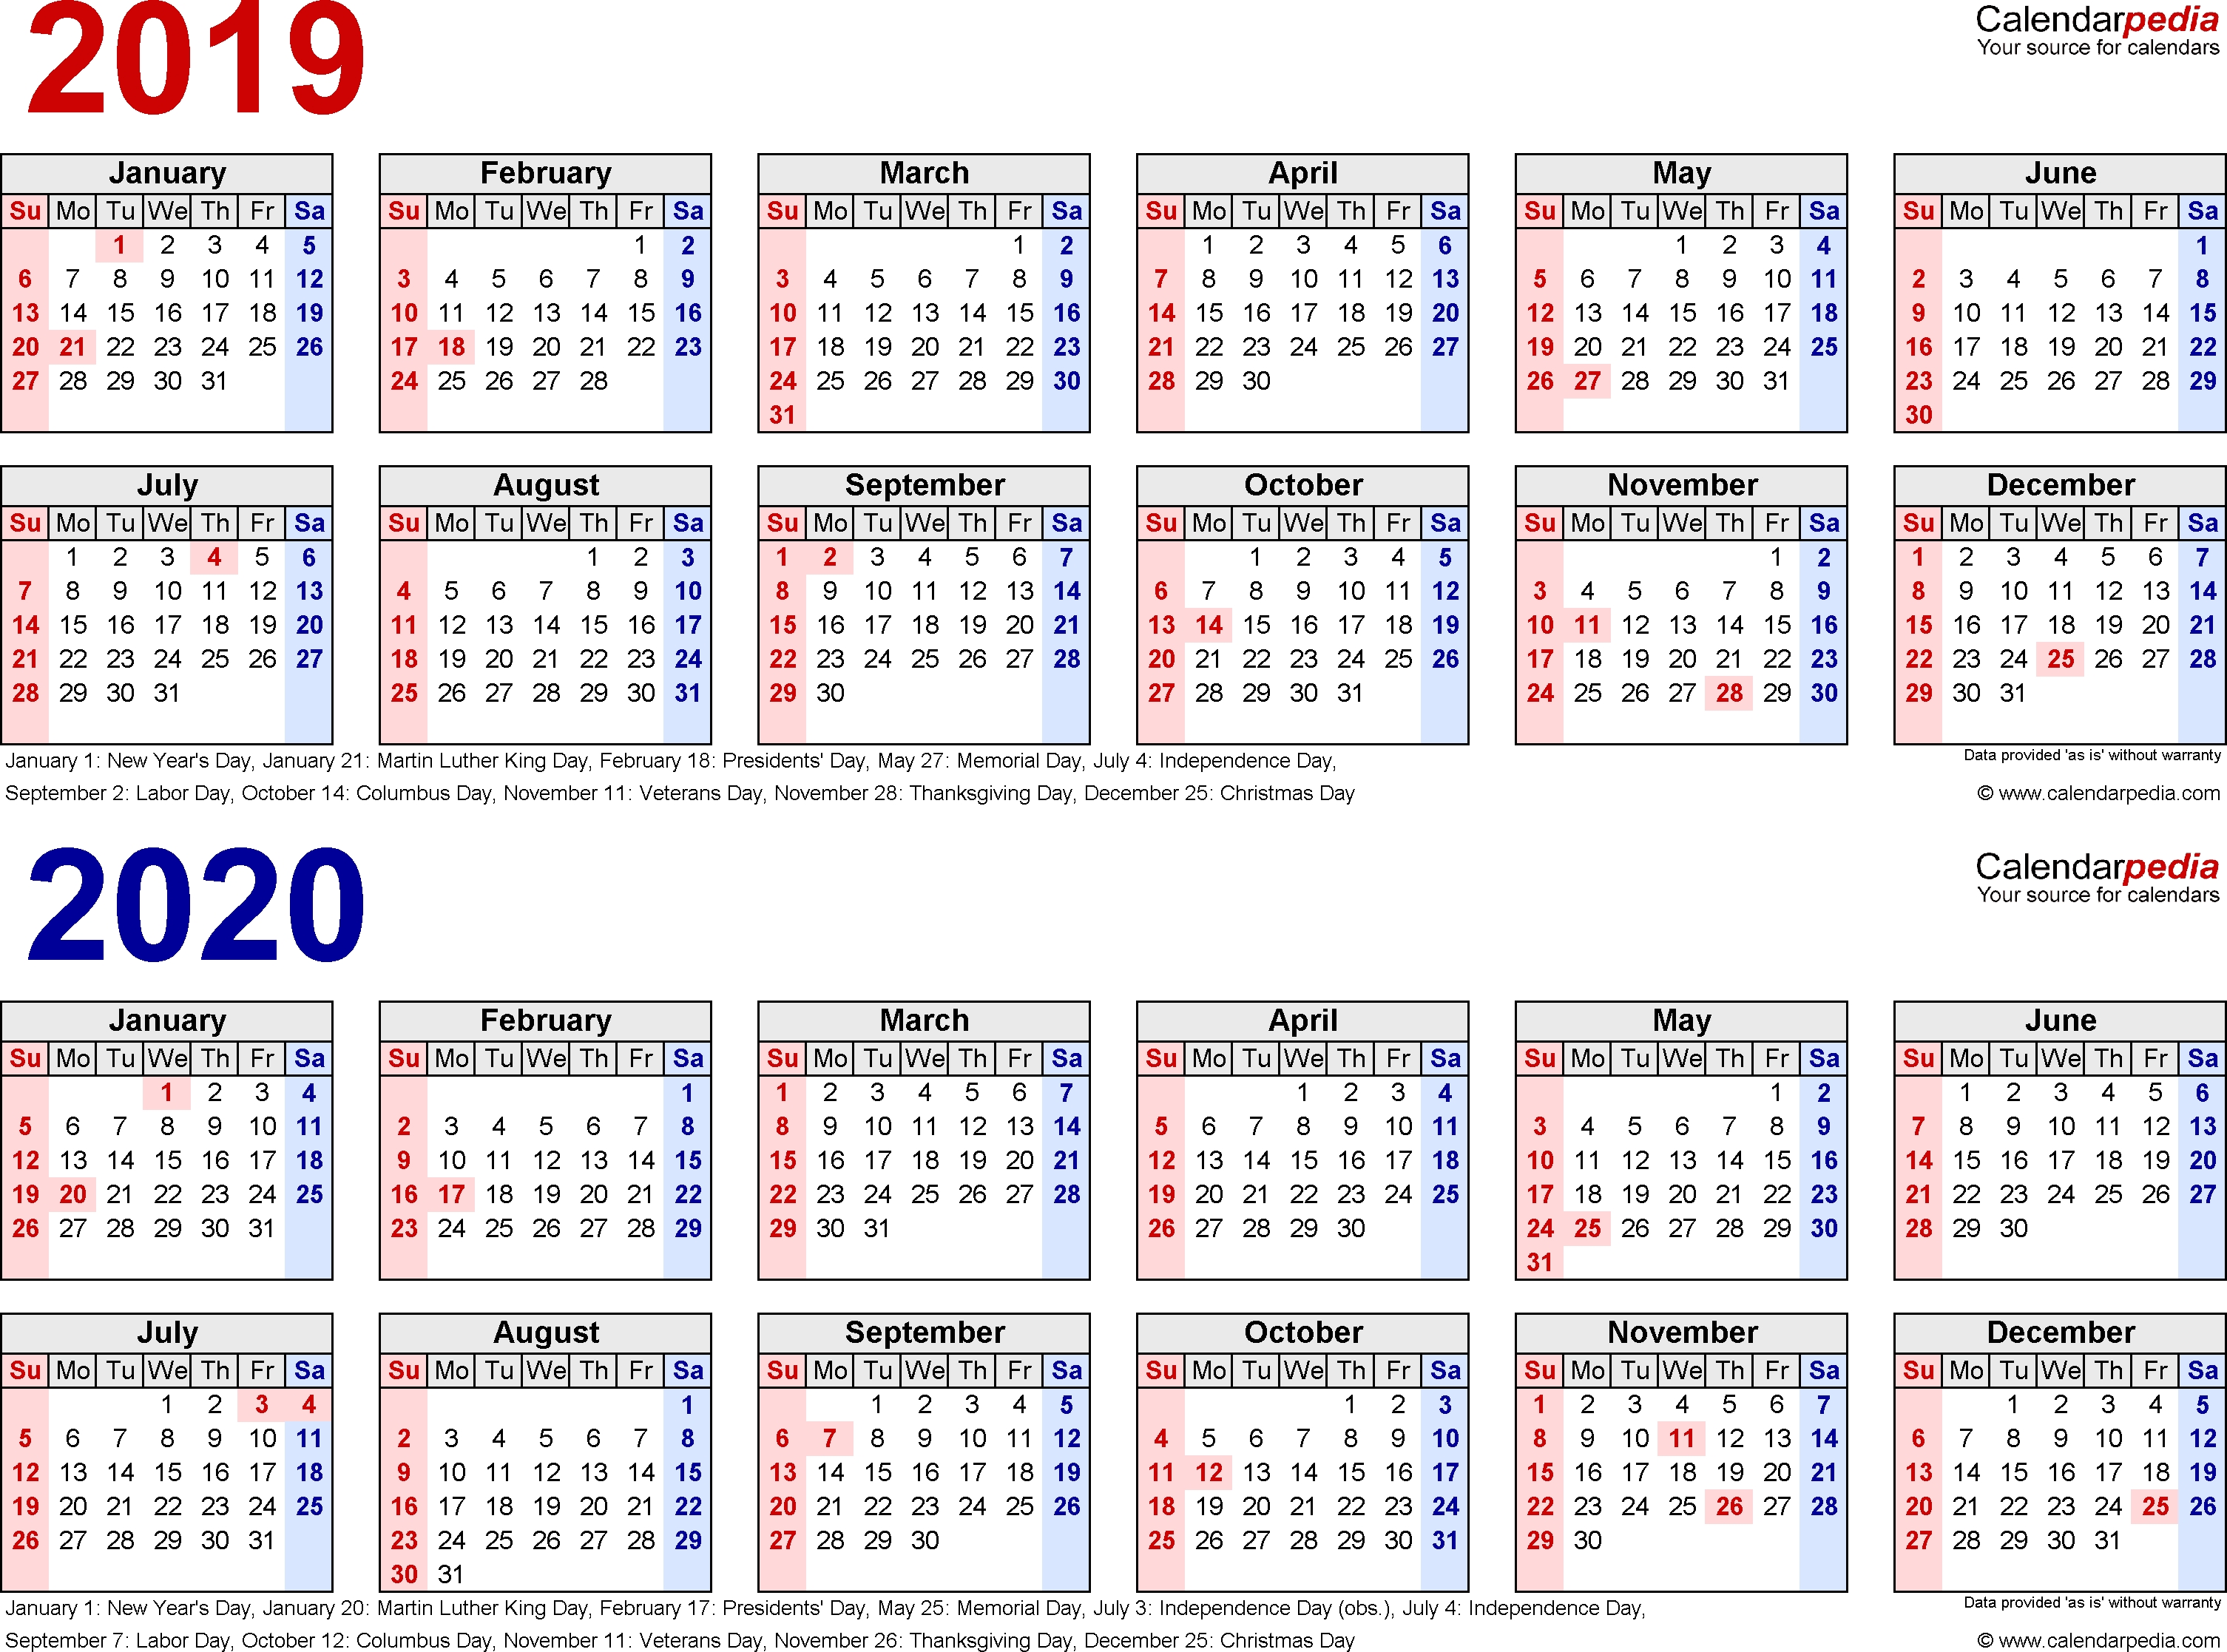 2019-2020 Calendar - Free Printable Two-Year Pdf Calendars  +2020 Calender Month By Month